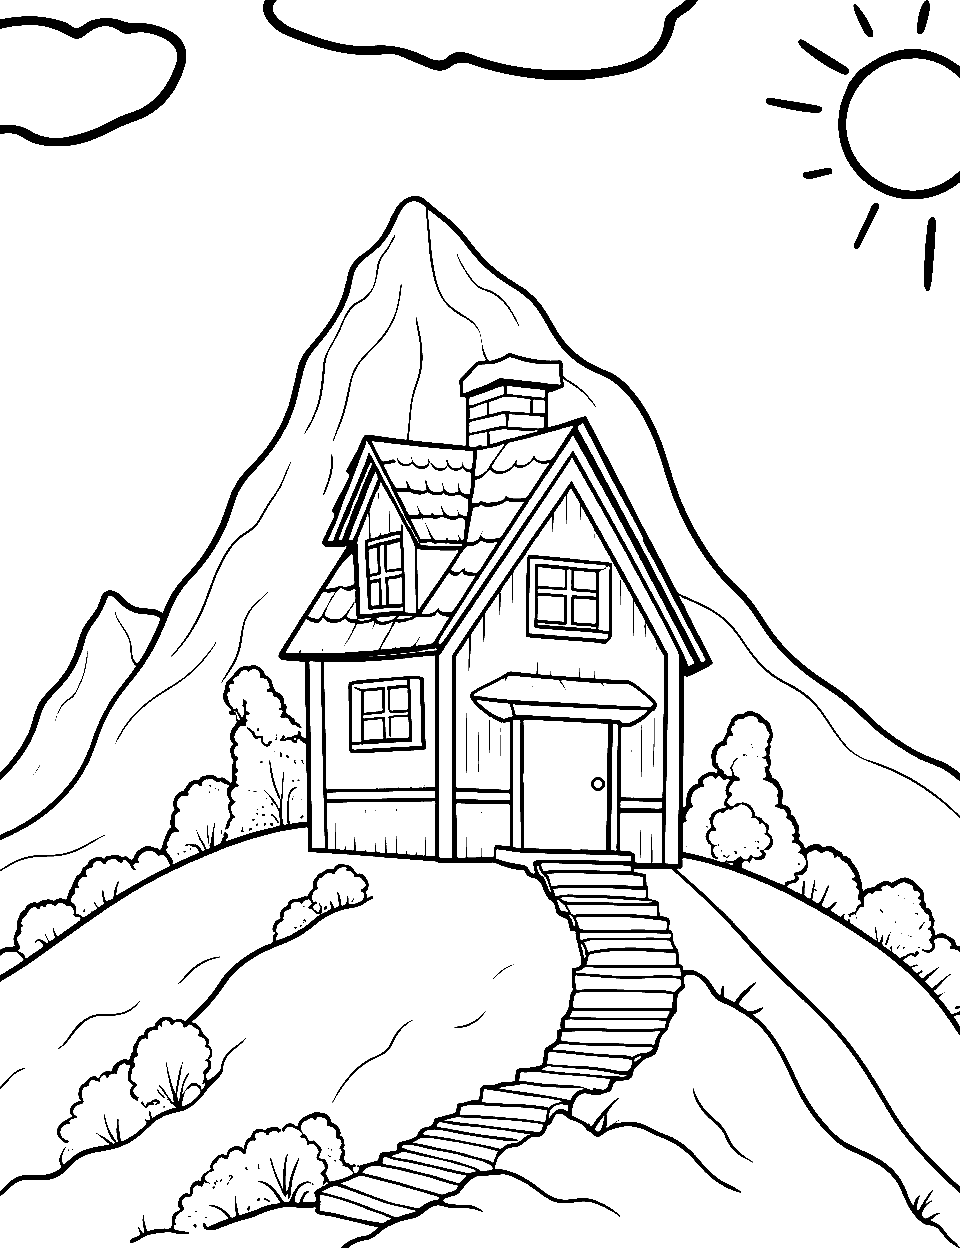 Mountain Top Retreat Coloring Page - A house on a mountain peak.